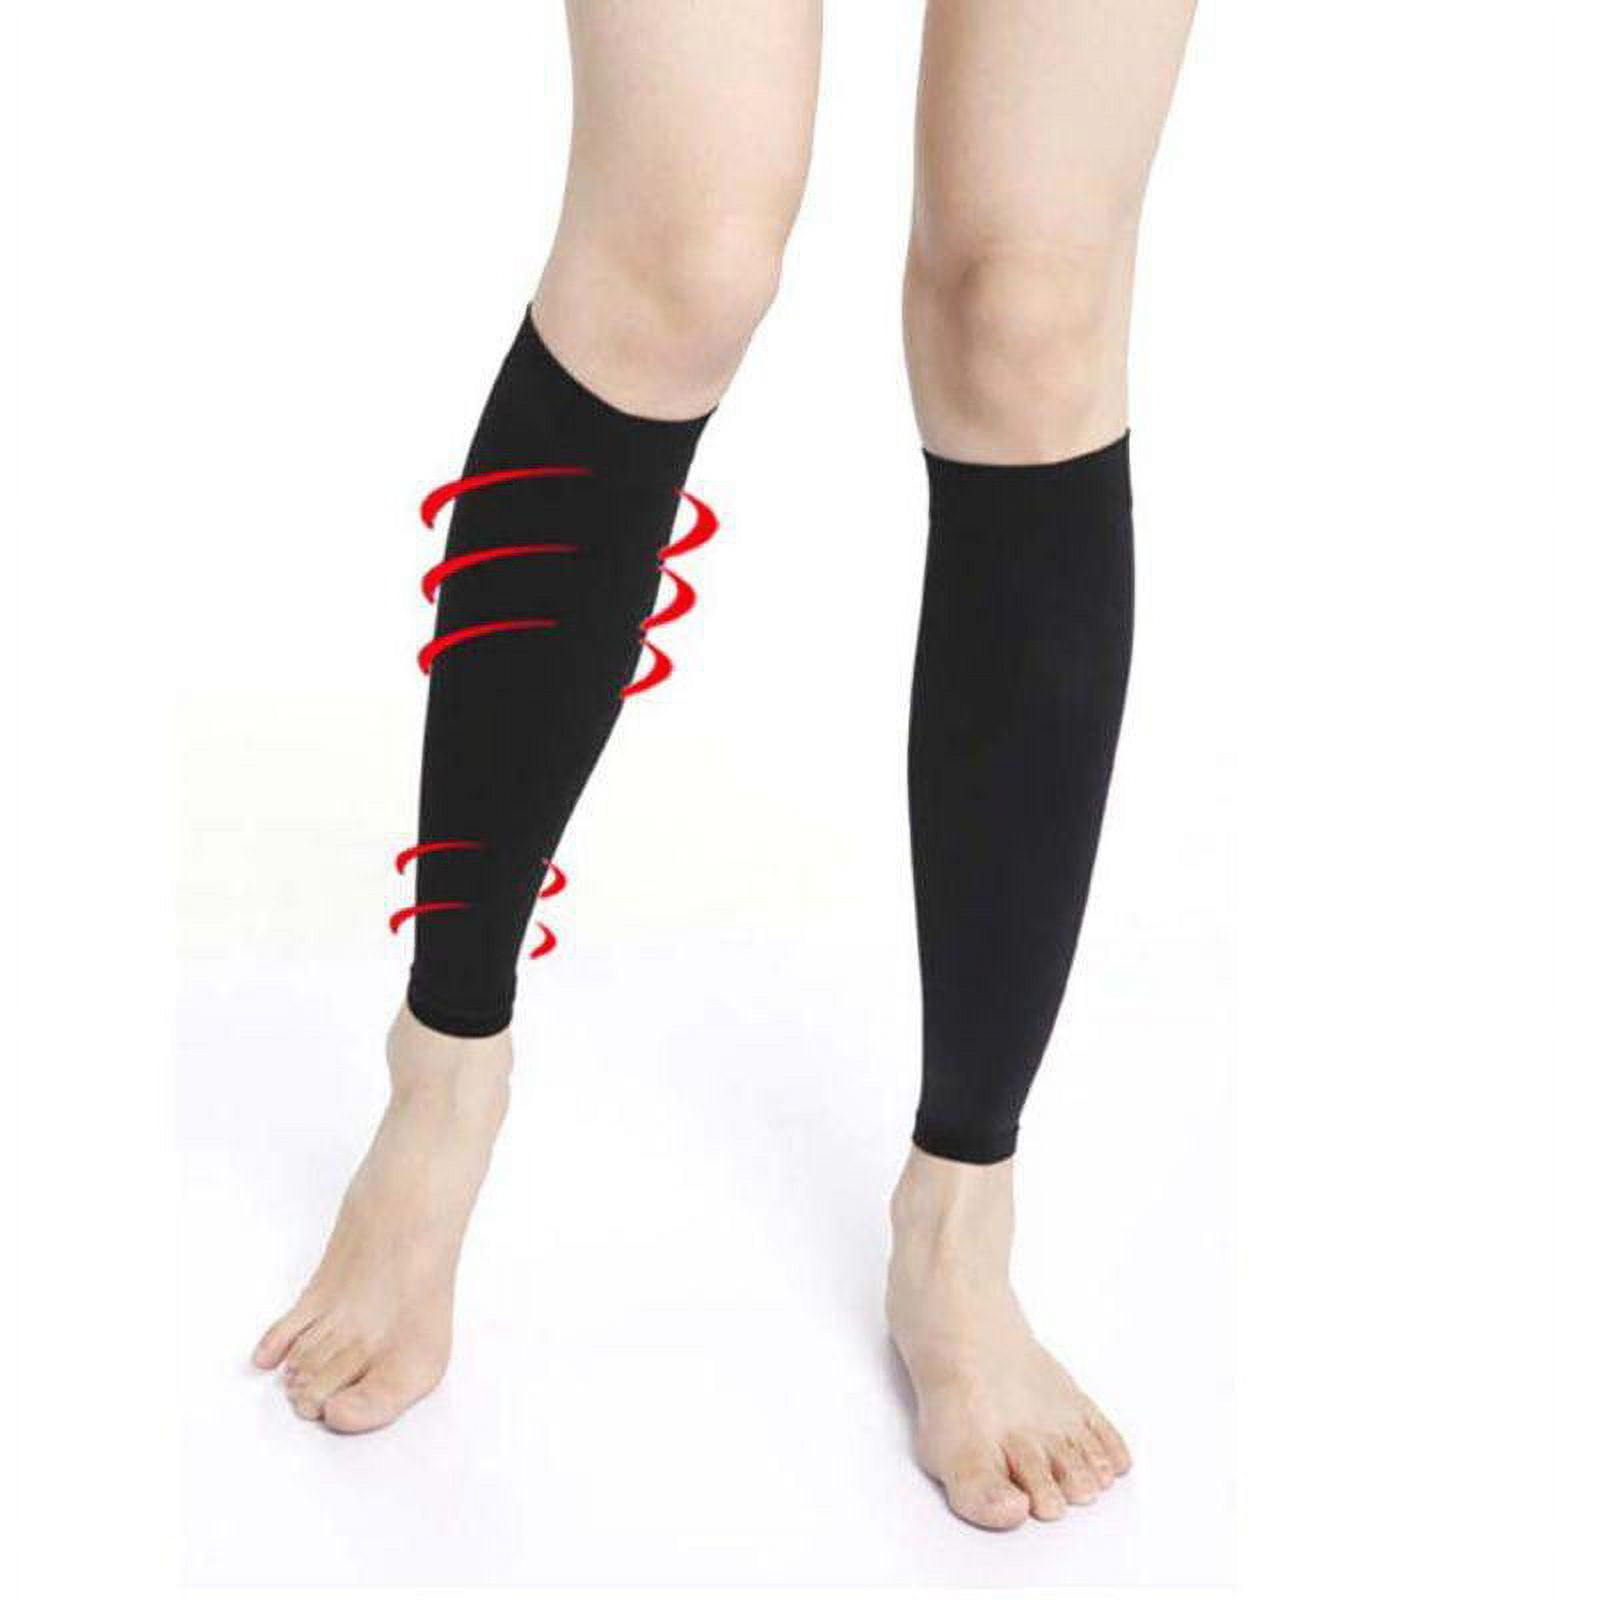 Buy KUE Calf sleeves for Men & women  Footless Compression Socks Stockings  for Calf Support, Circulation, Swelling, Shin Splints, Varicose Veins,  Recovery (Combo Pack of 2 - Black-Turquoise Size- S/M) Online